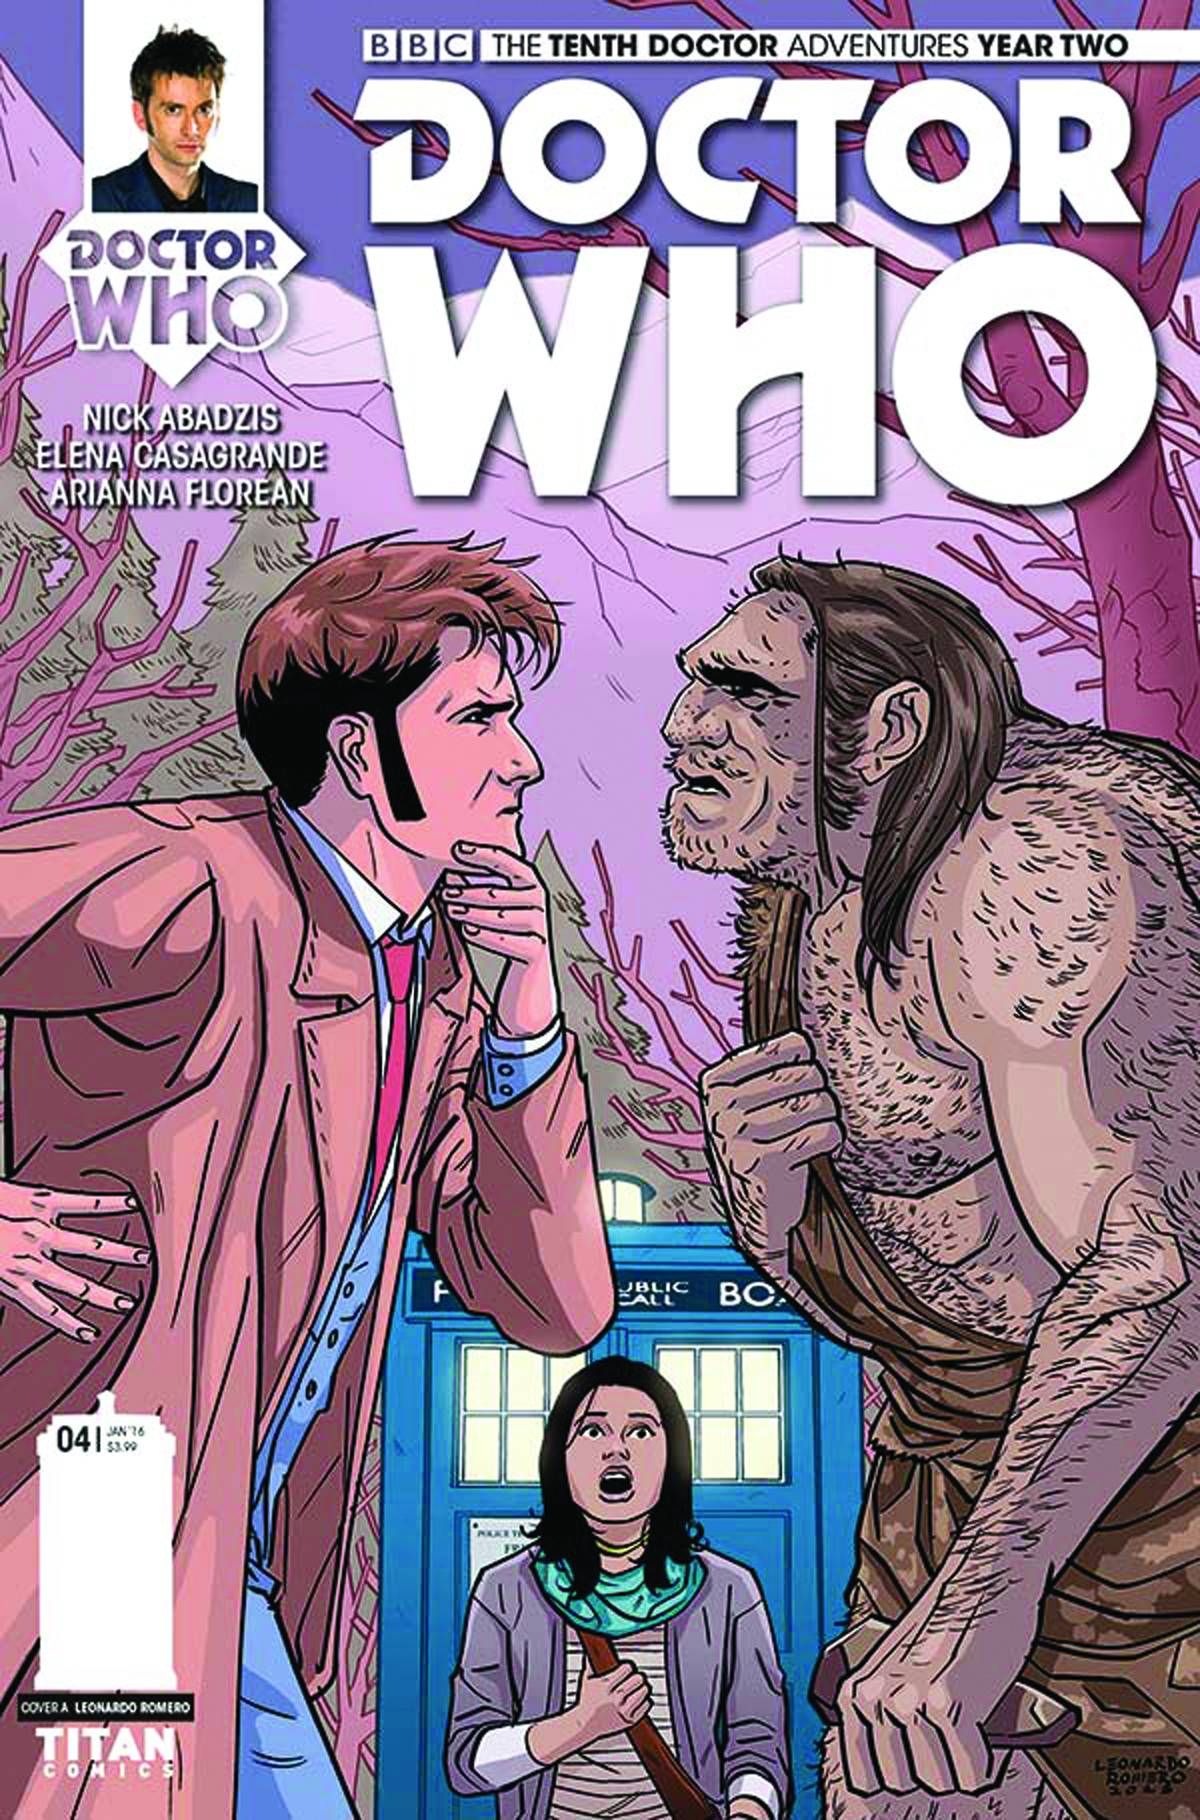 Doctor Who: 10th Doctor - Year Two #4 Comic